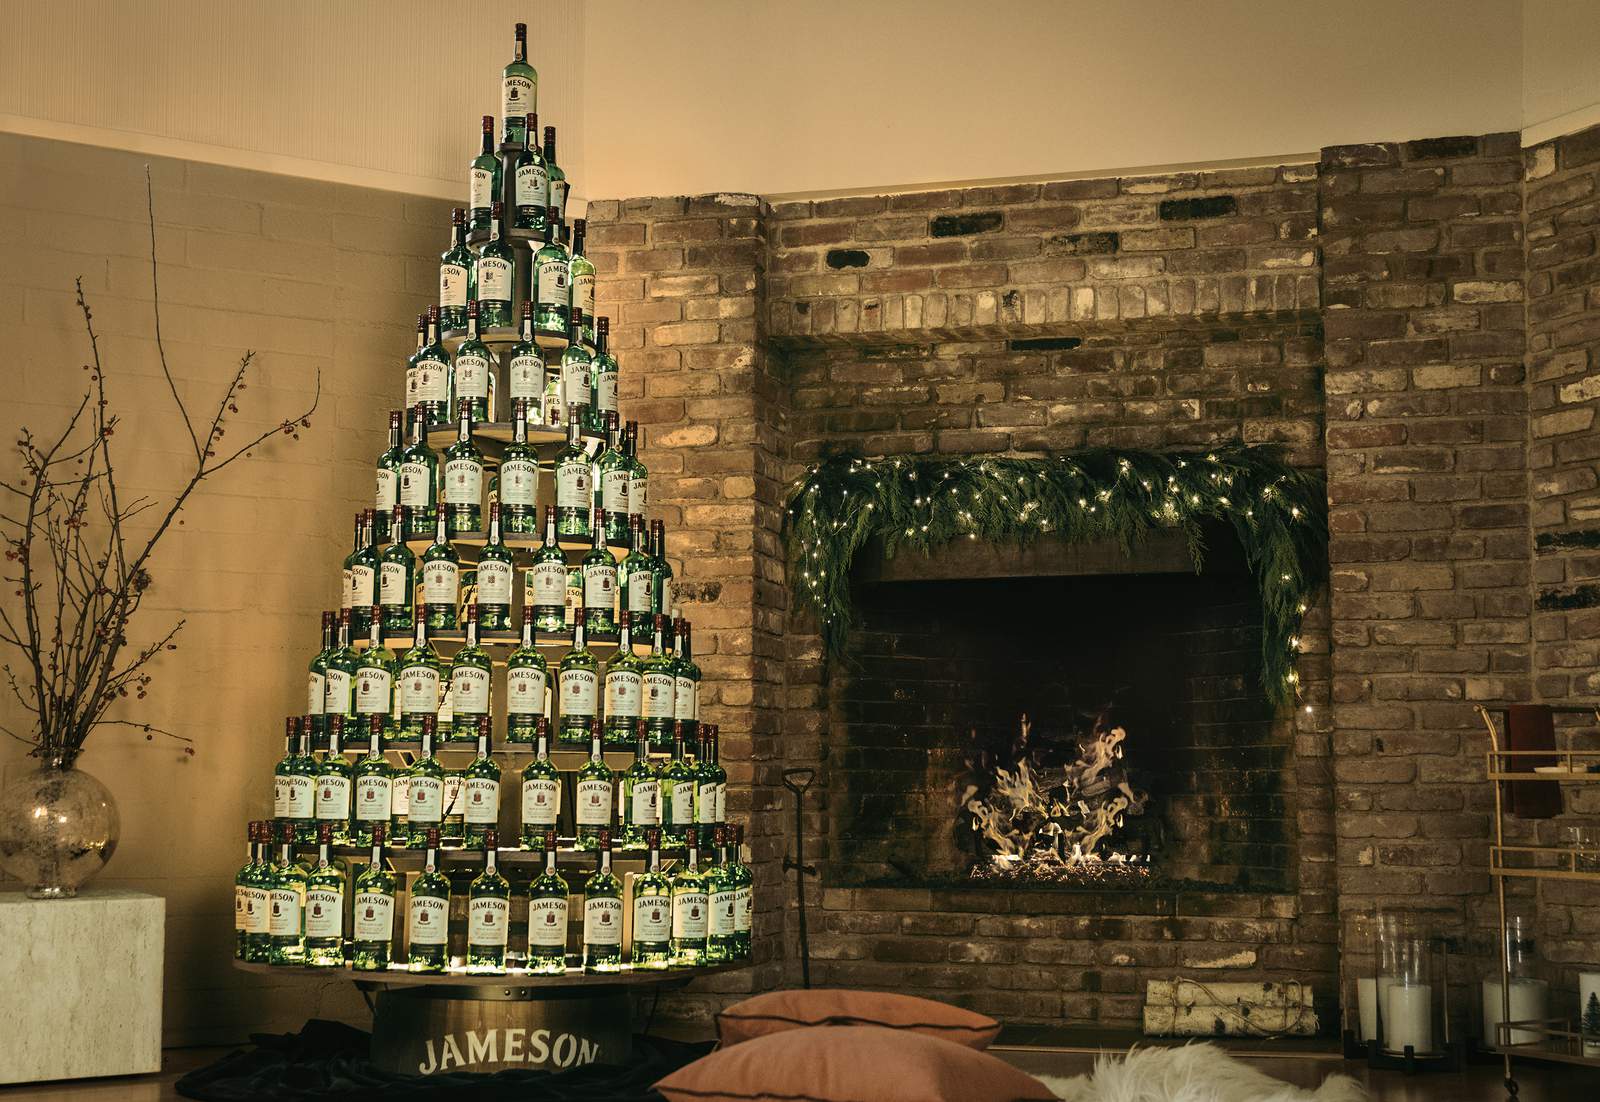 Need a 9-foot whiskey tree? 2020’s got that